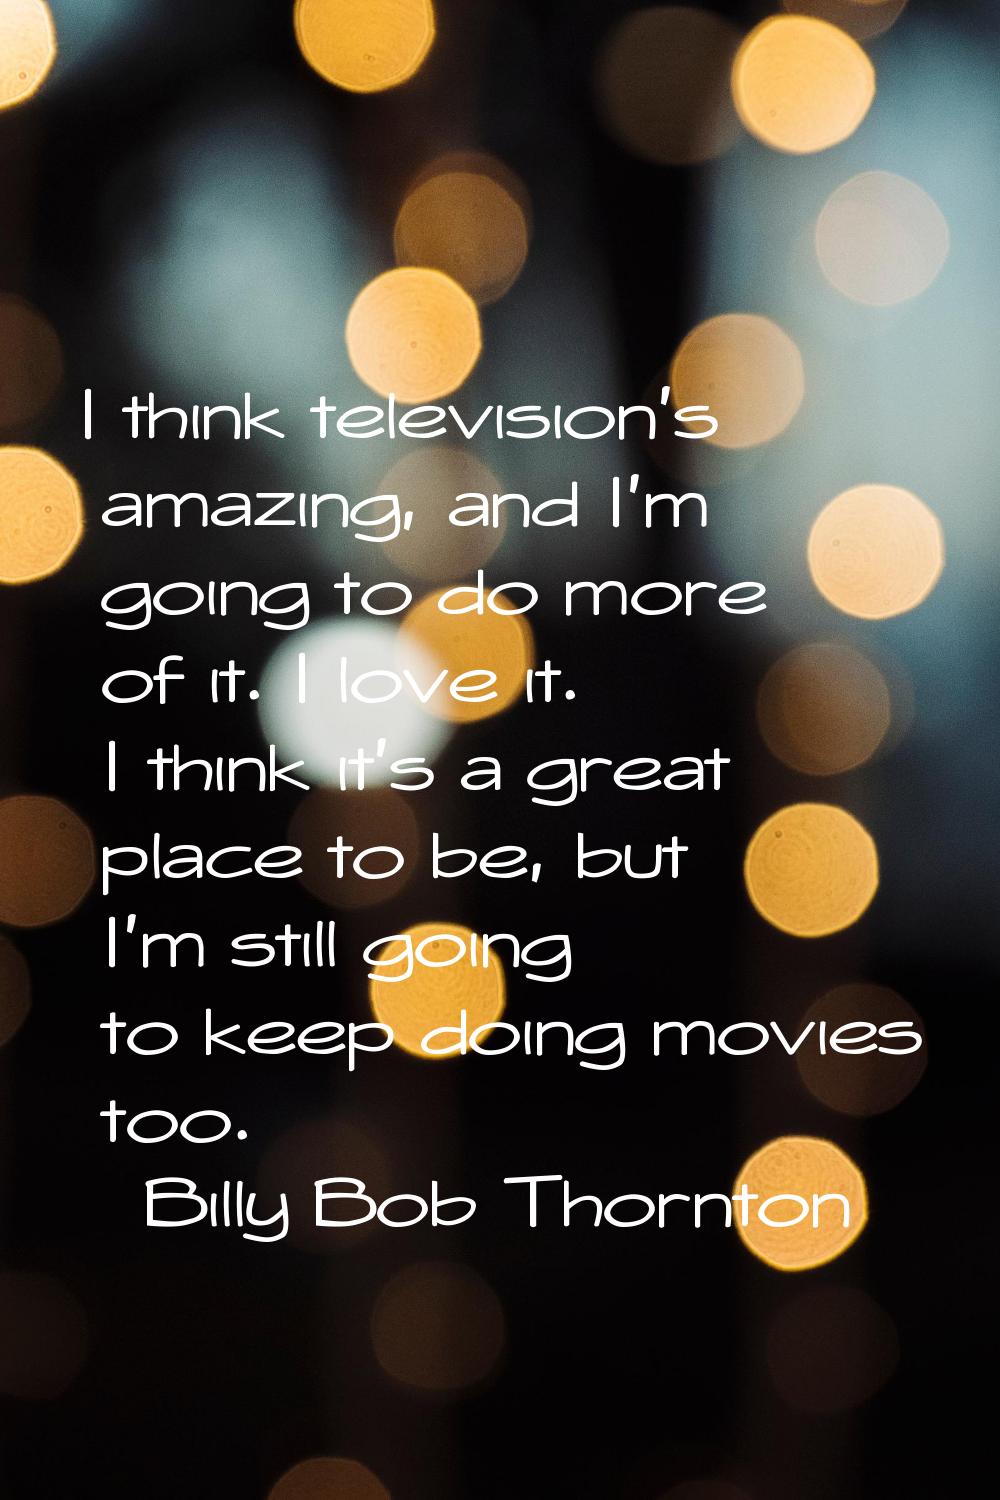 I think television's amazing, and I'm going to do more of it. I love it. I think it's a great place